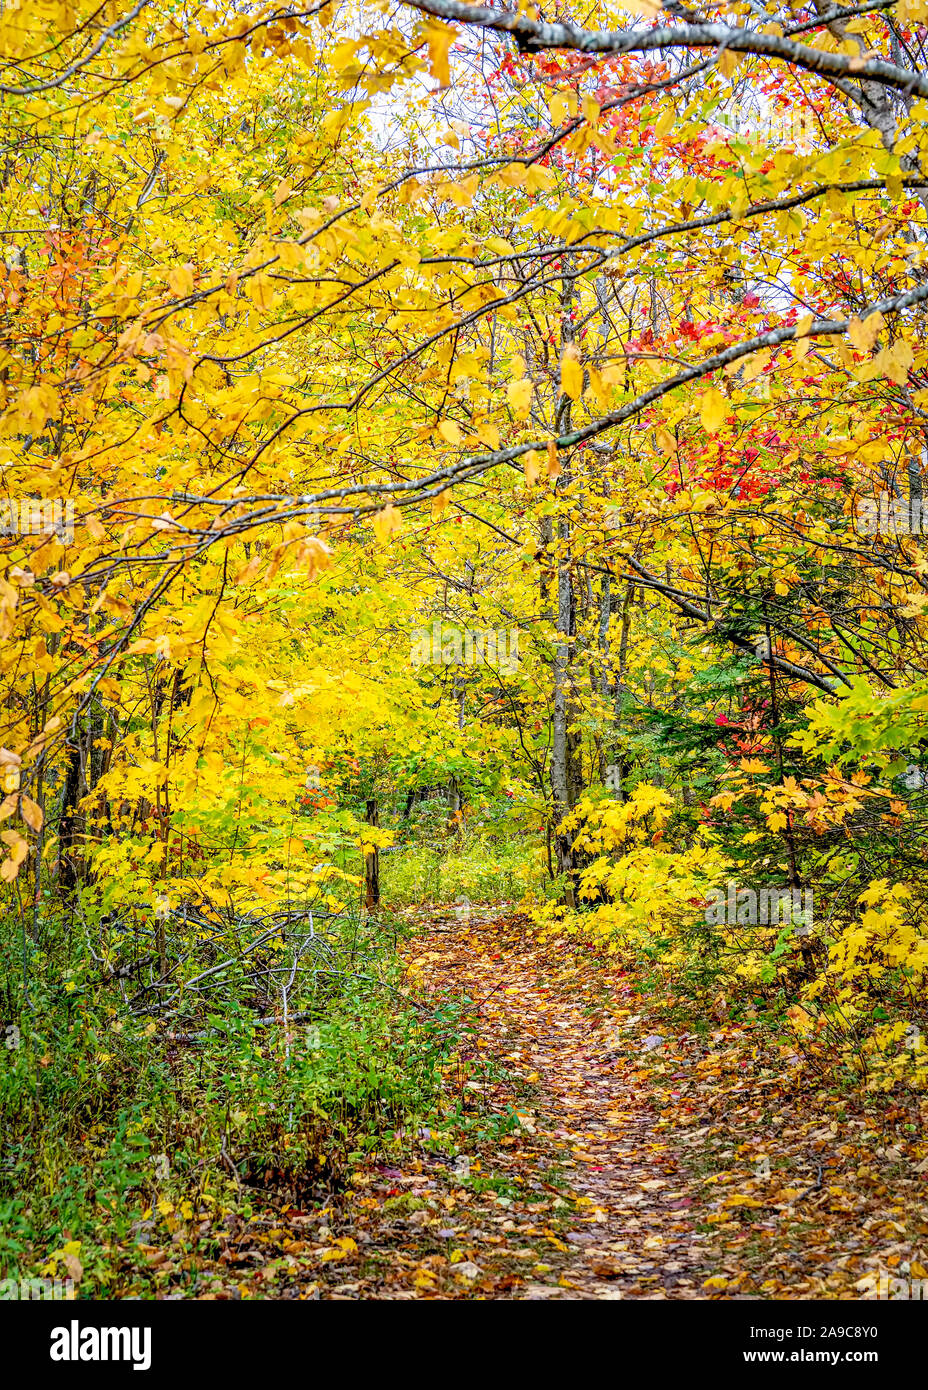 Fallen maple leaves cover a walking track through the forest. Stock Photo